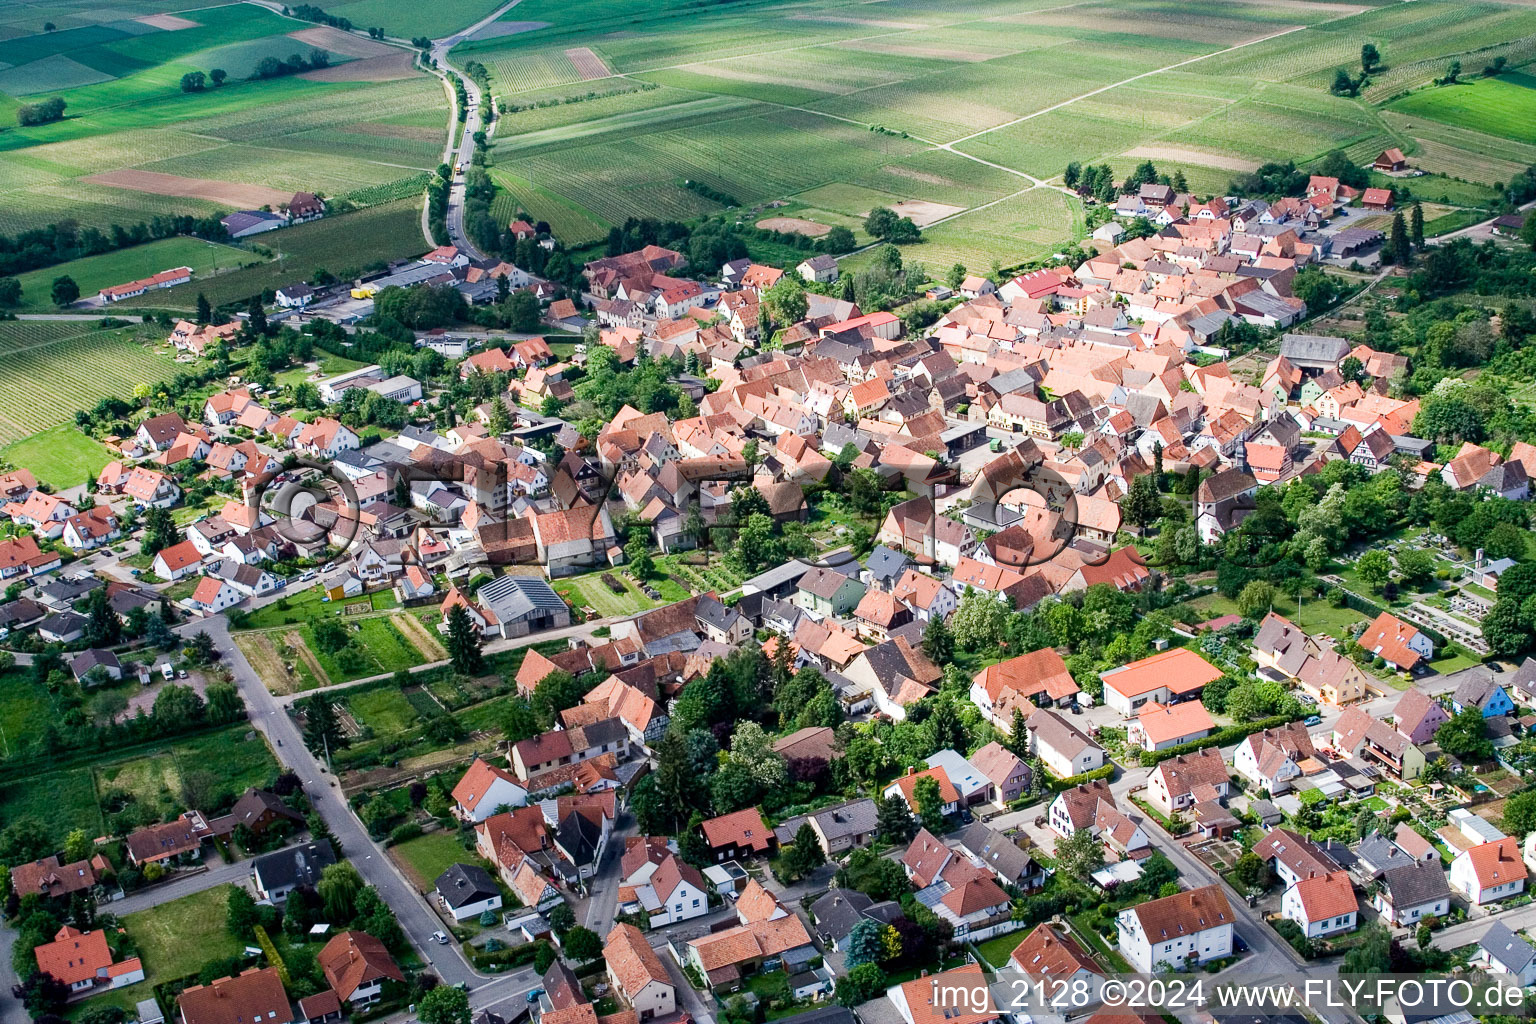 Village - view on the edge of agricultural fields and farmland in Impflingen in the state Rhineland-Palatinate from above